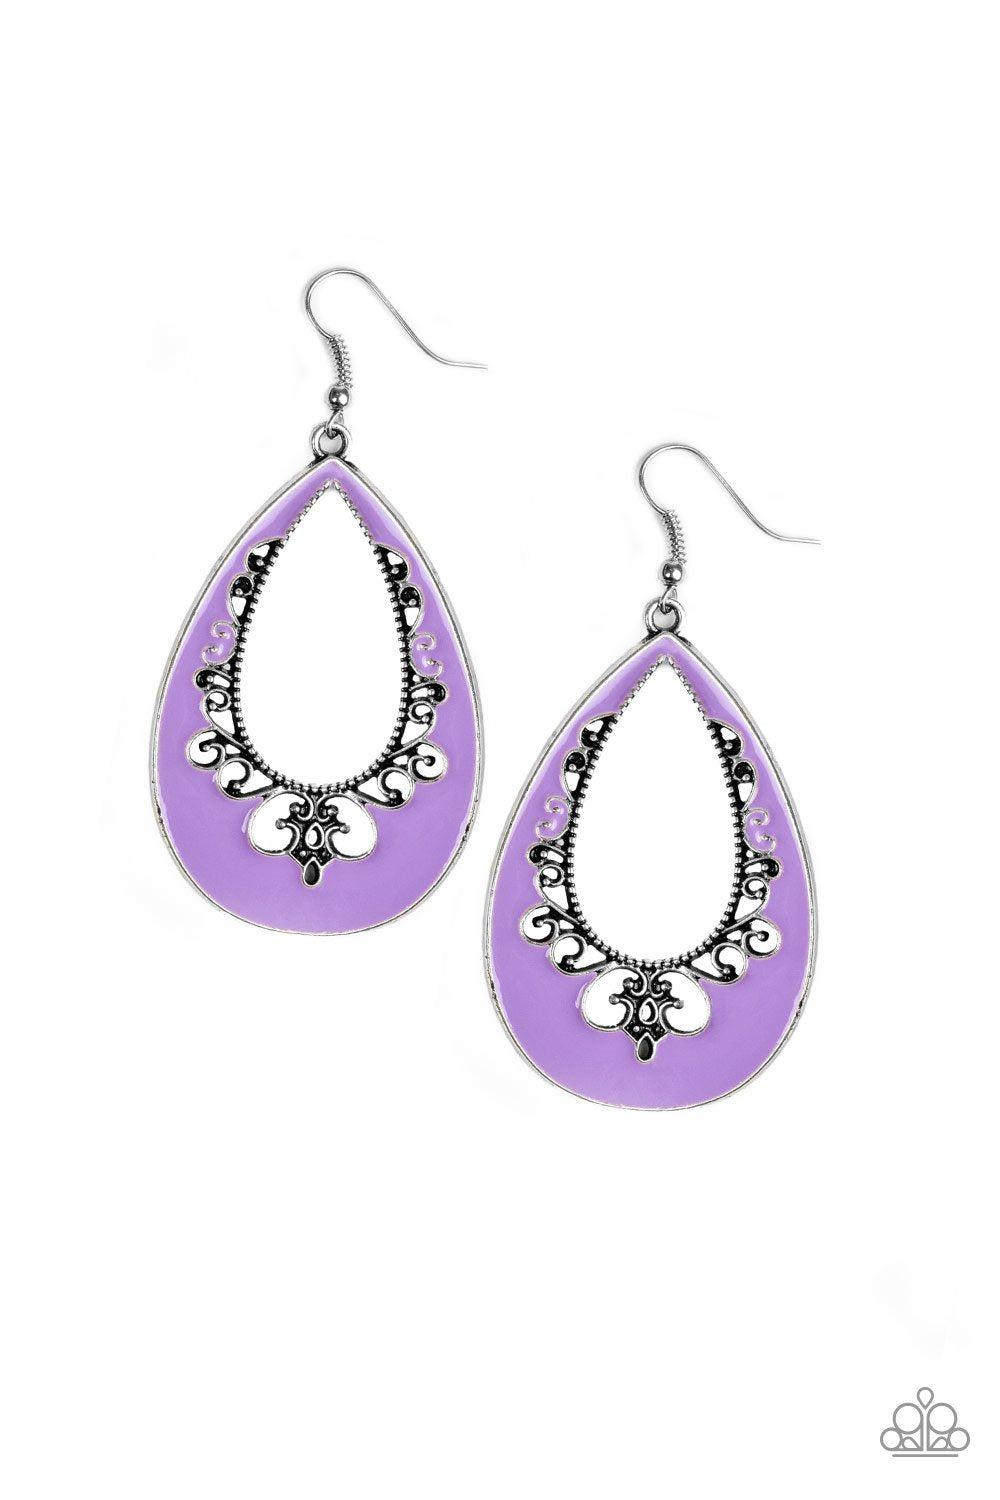 Compliments To The CHIC Purple Teardrop Earrings - Paparazzi Accessories-CarasShop.com - $5 Jewelry by Cara Jewels